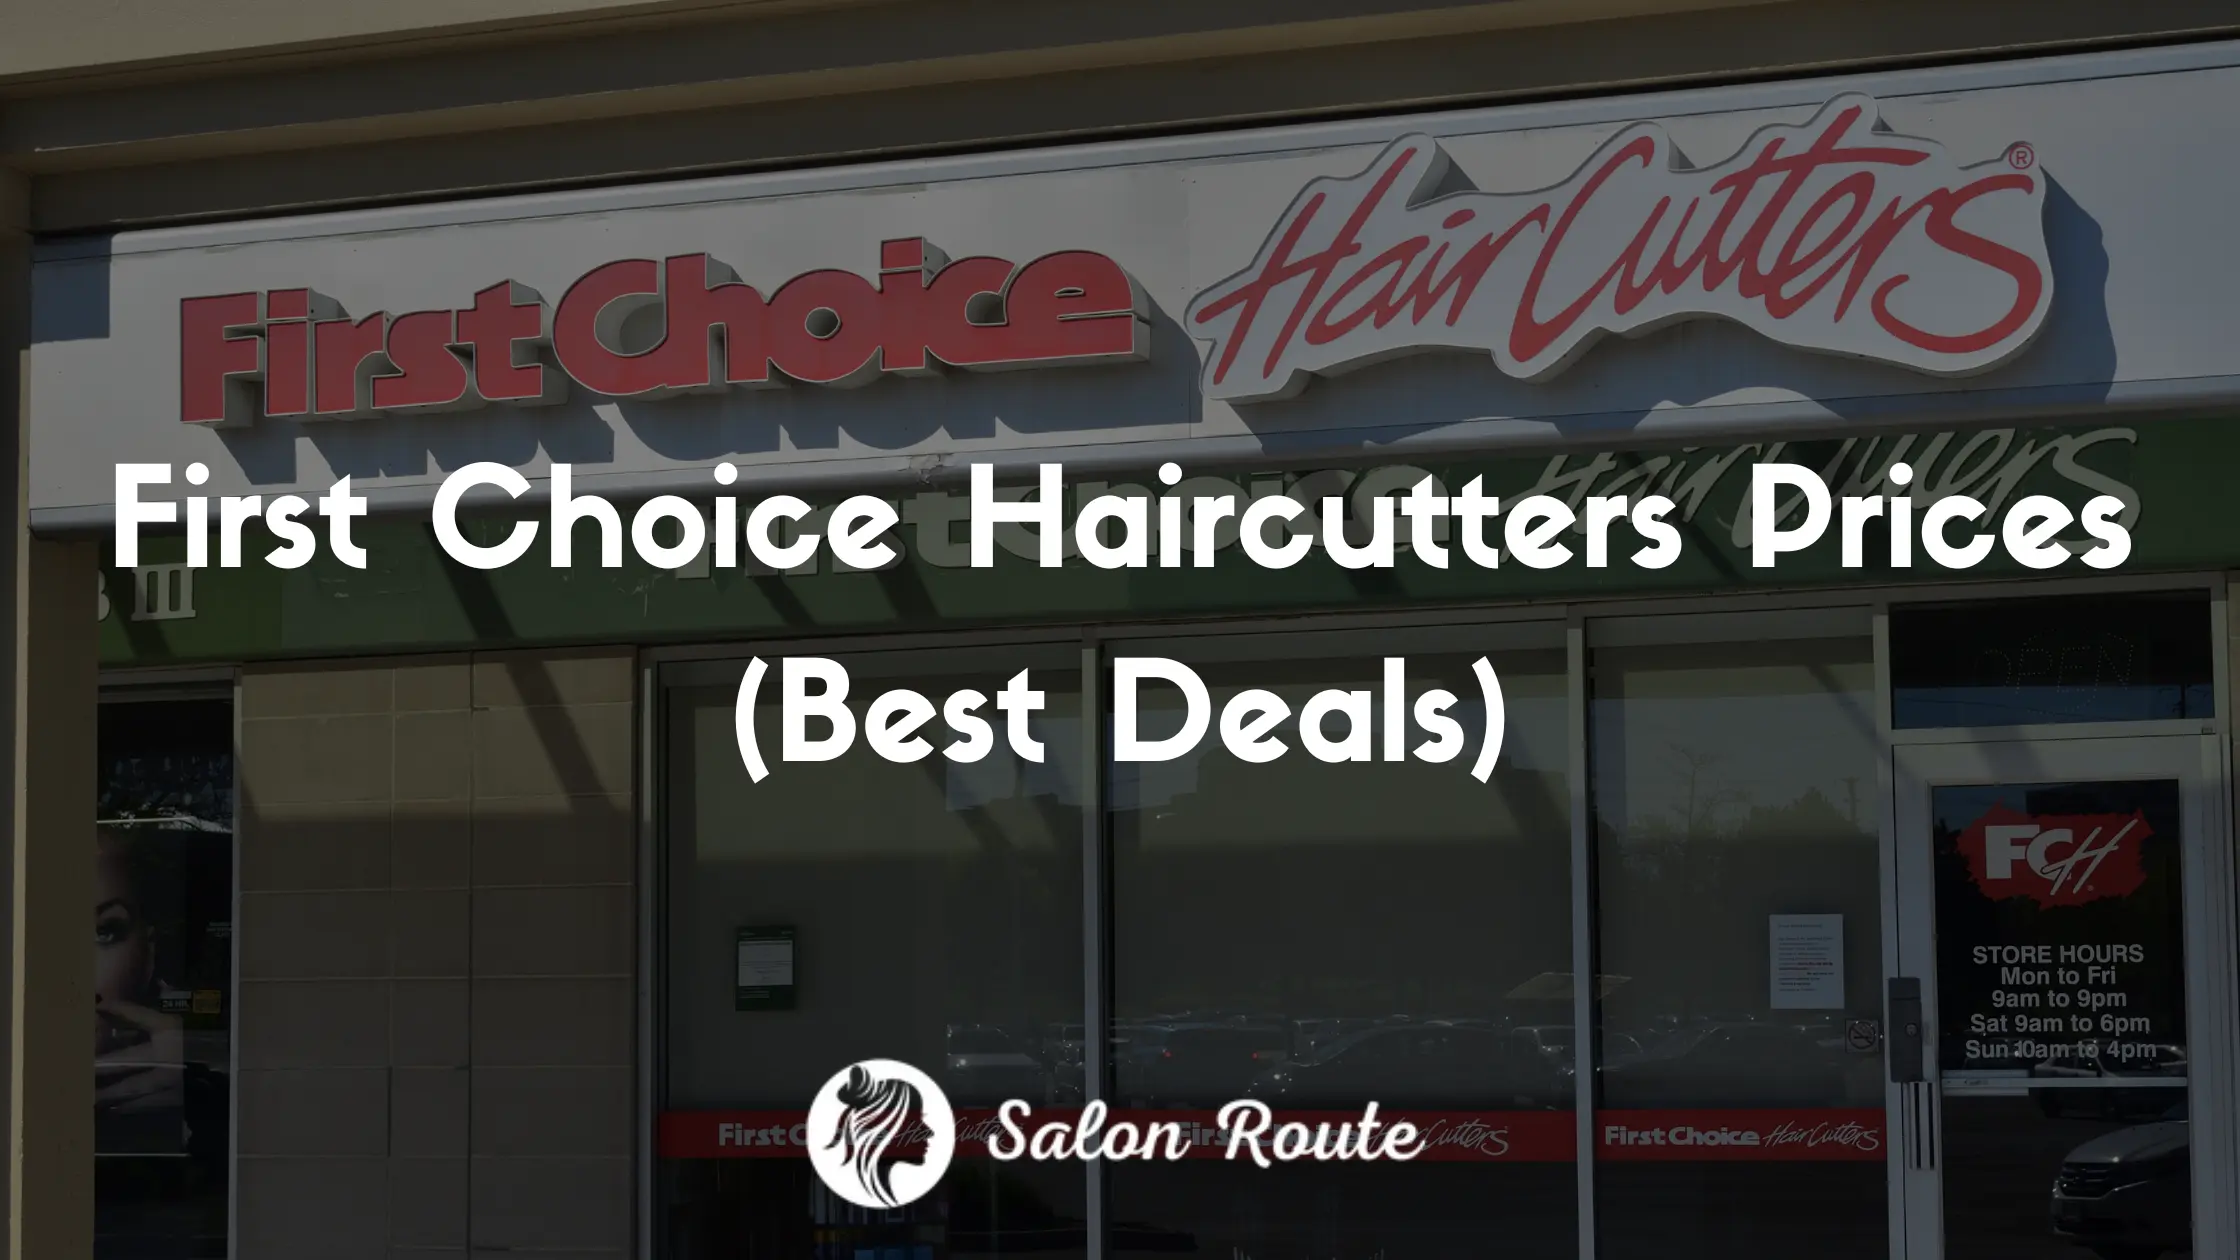 First Choice Haircutters Prices (Best Deals)